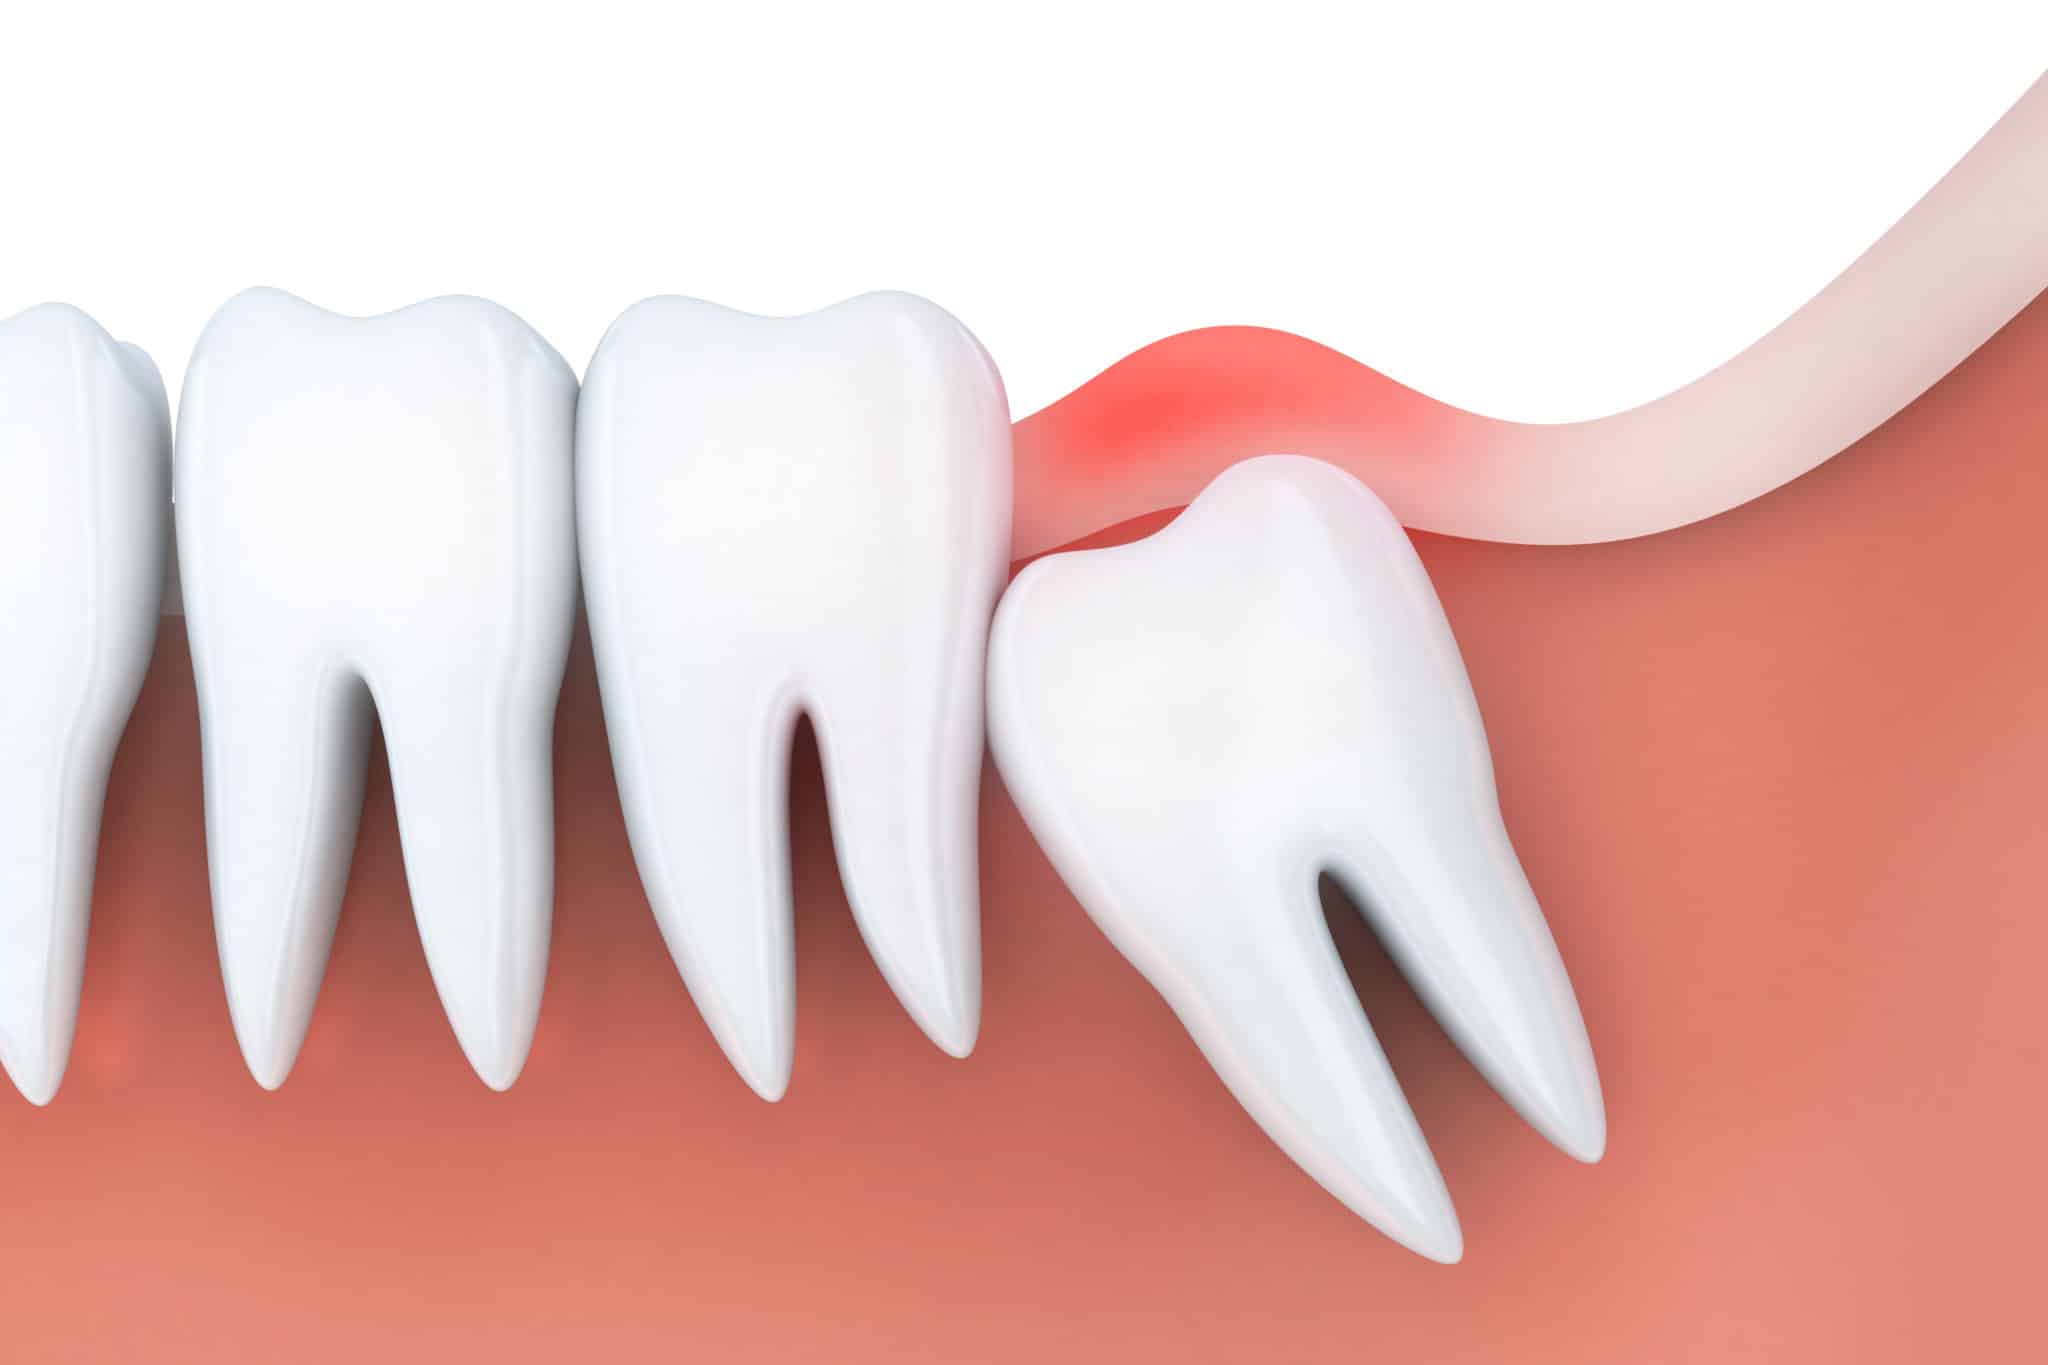 Wisdom Teeth Removal Recovery Time: How Long Does it Take?